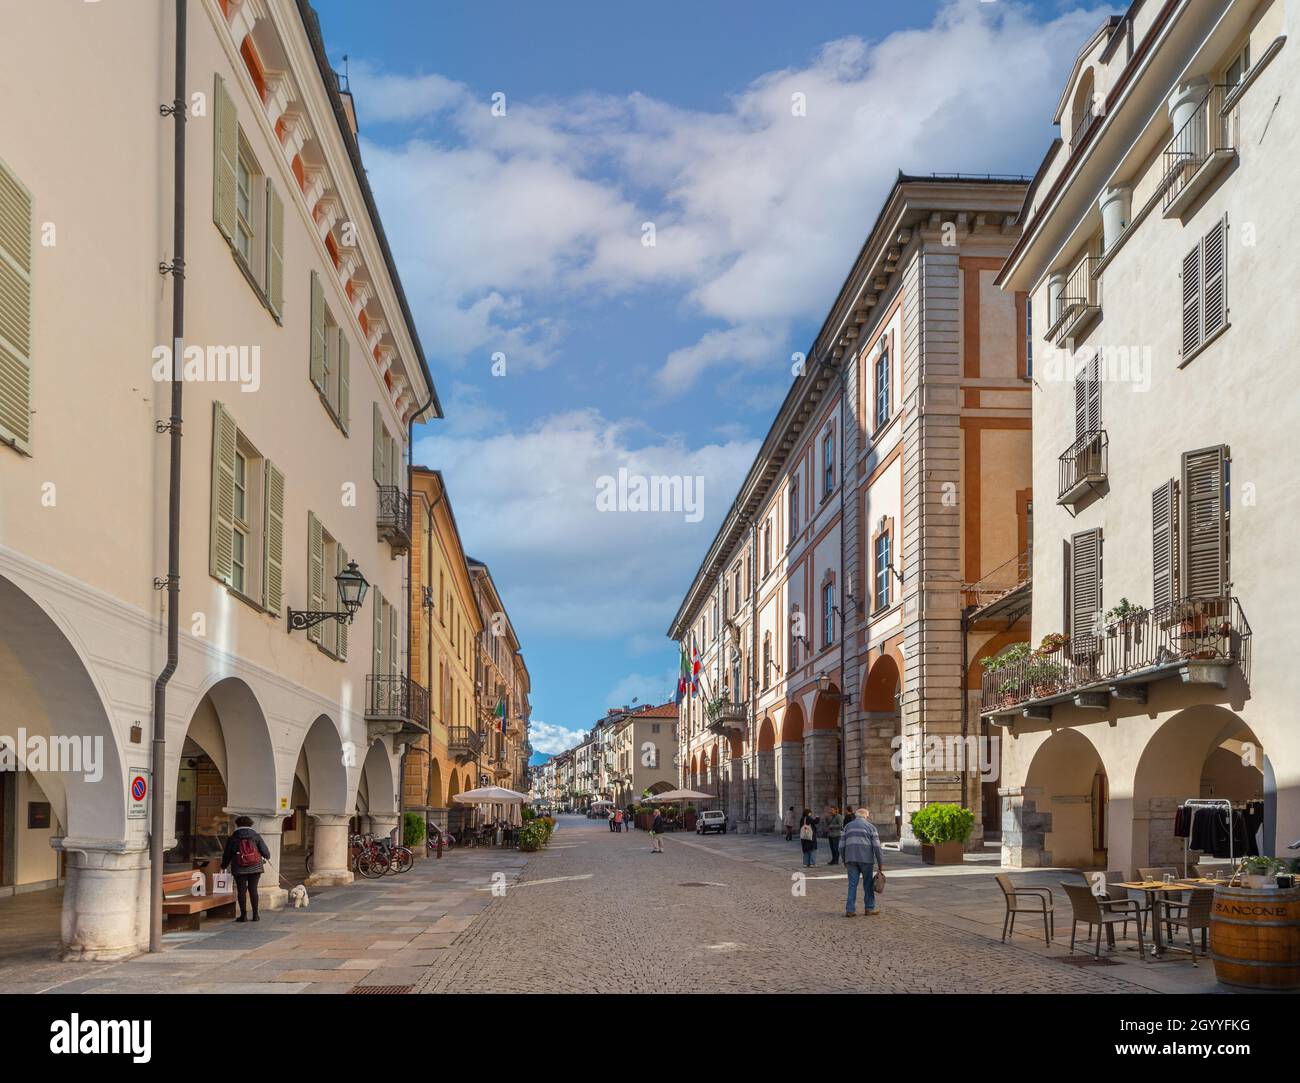 Cuneo, Piedmont, Italy - October 6, 2021: Via Roma with Town Hall on the right, historic buildings with the typical arcades (portici di Cuneo) Stock Photo